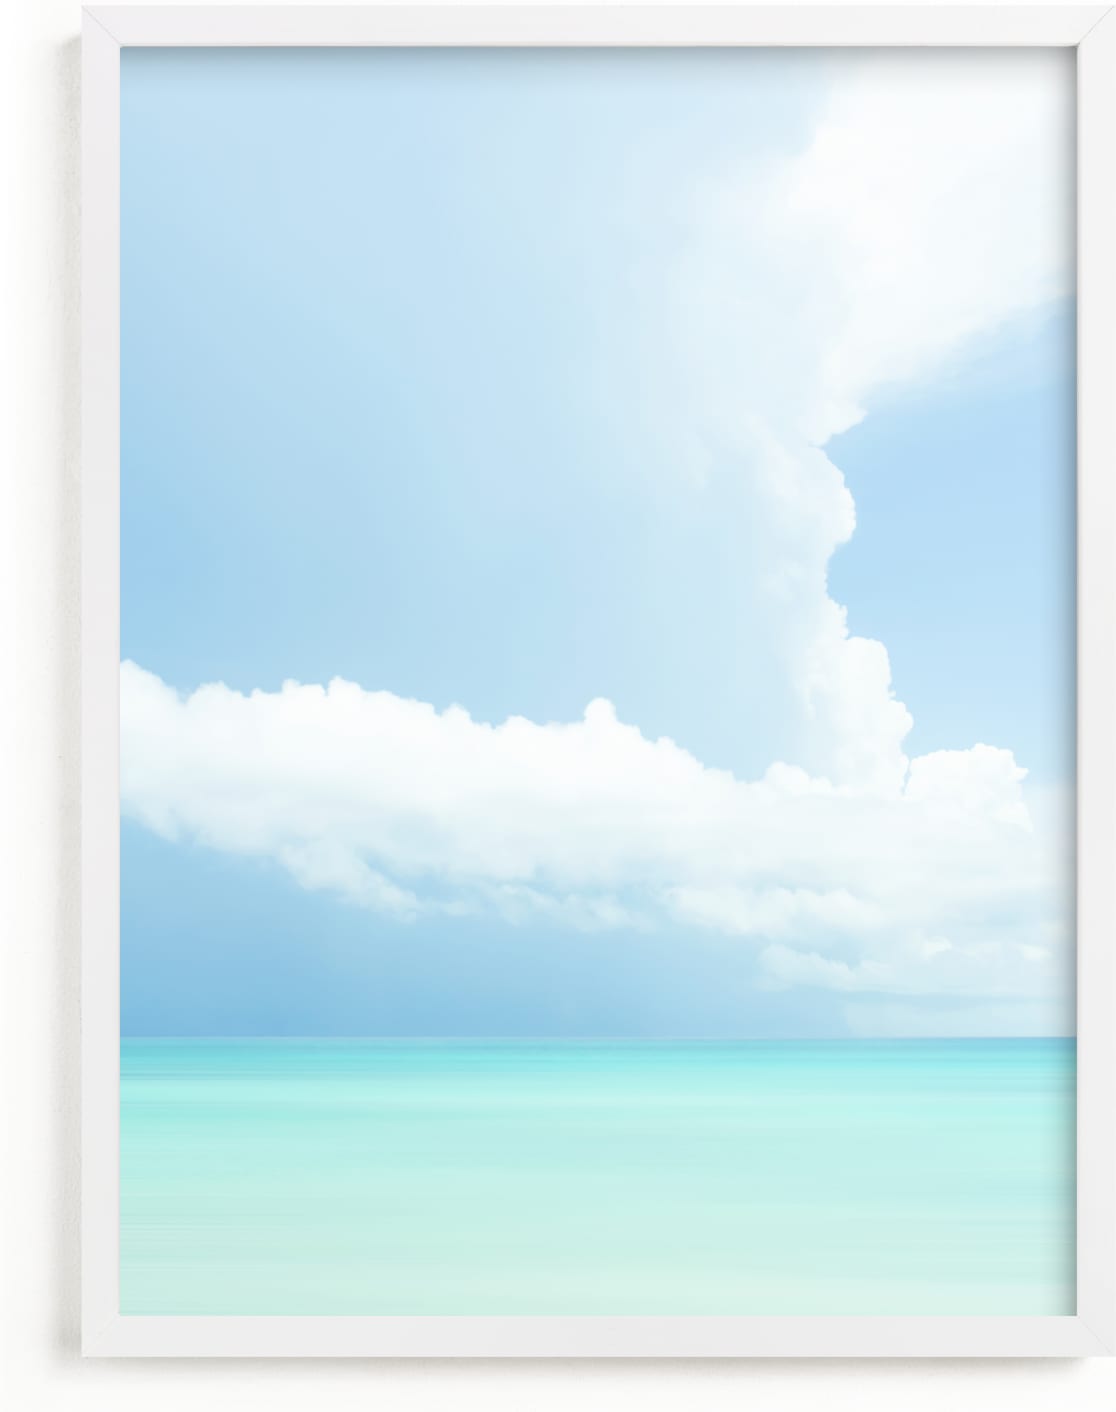 This is a blue art by Lisa Sundin called Summer Clouds Series 2.